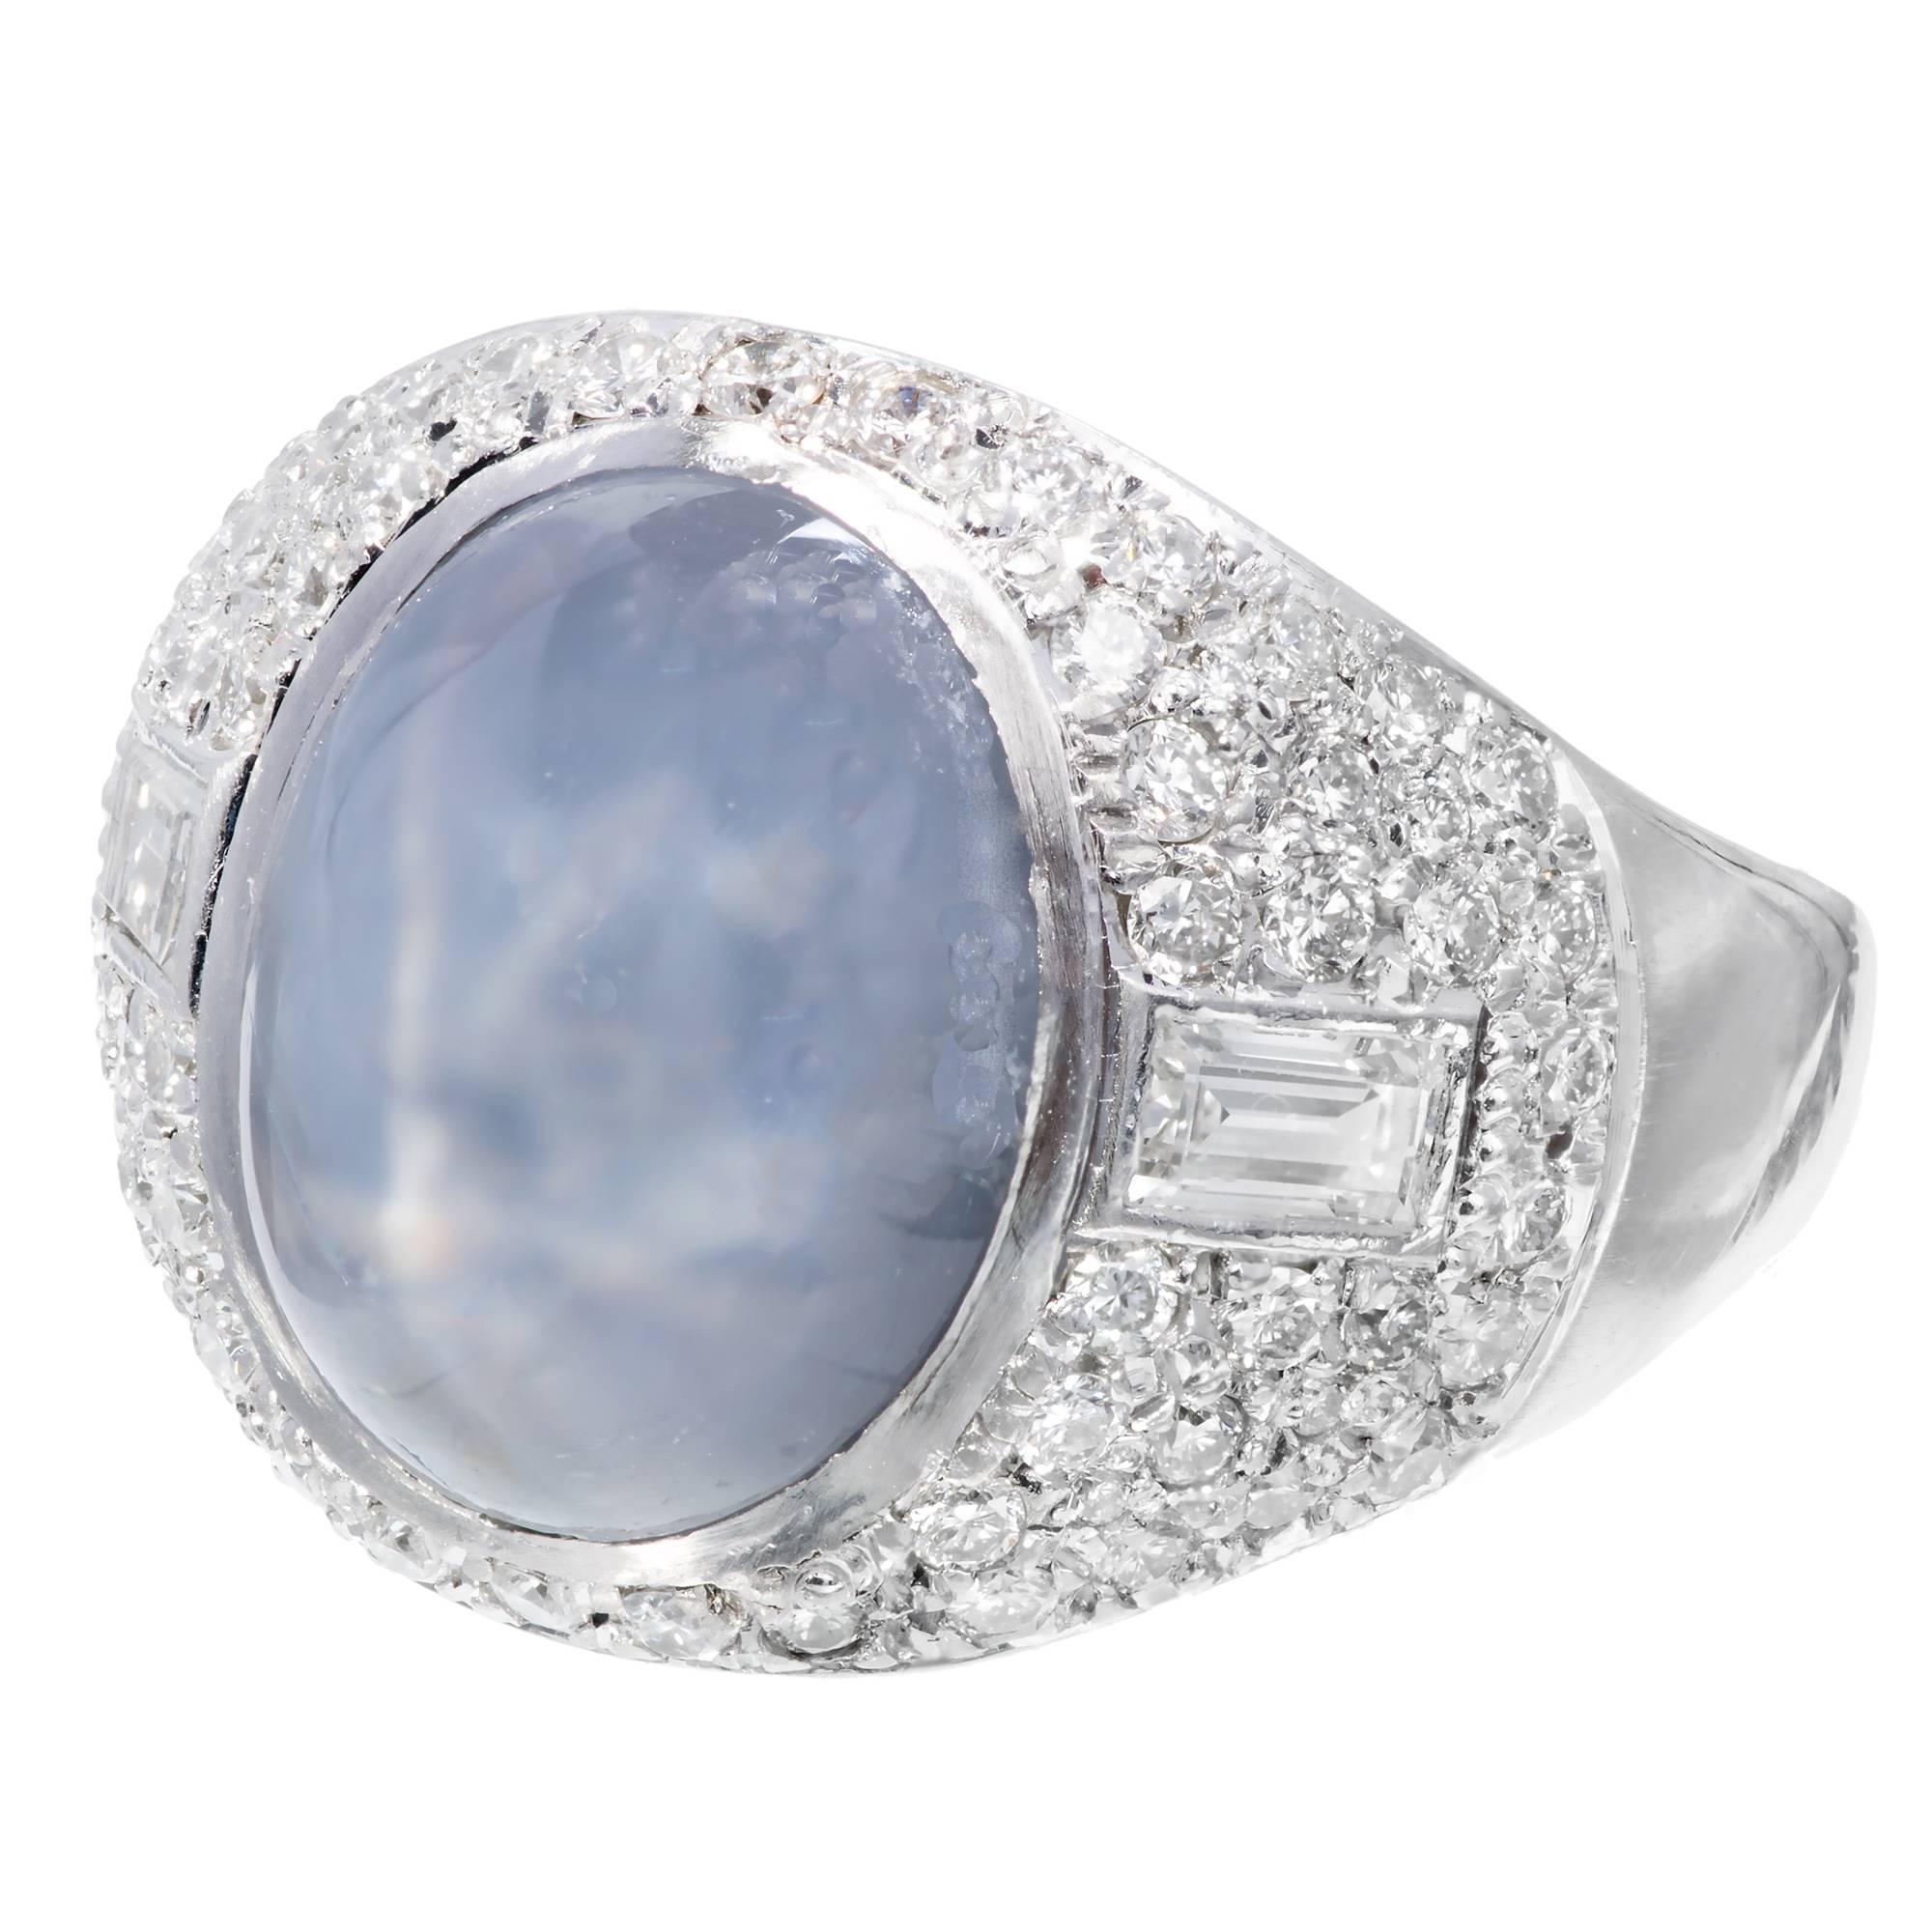 Handmade Art Deco pave diamond natural star Sapphire Platinum ring circa 1920-1930. GIA certified center cabochon oval center sapphire, with two baguette side diamonds and 60 round pave set accent diamonds. Set low to the hand. 

1 oval light violet